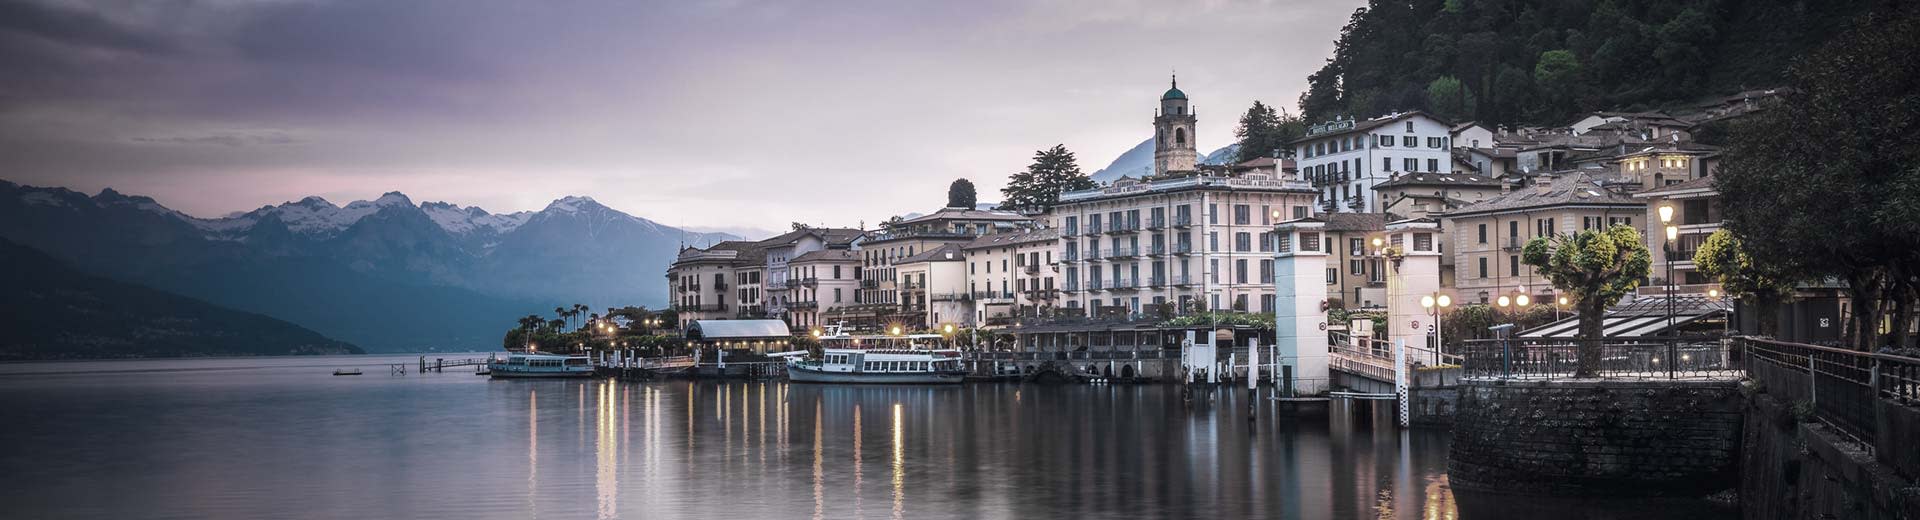 The beautiful building of Como line the shore of the lake at half light.